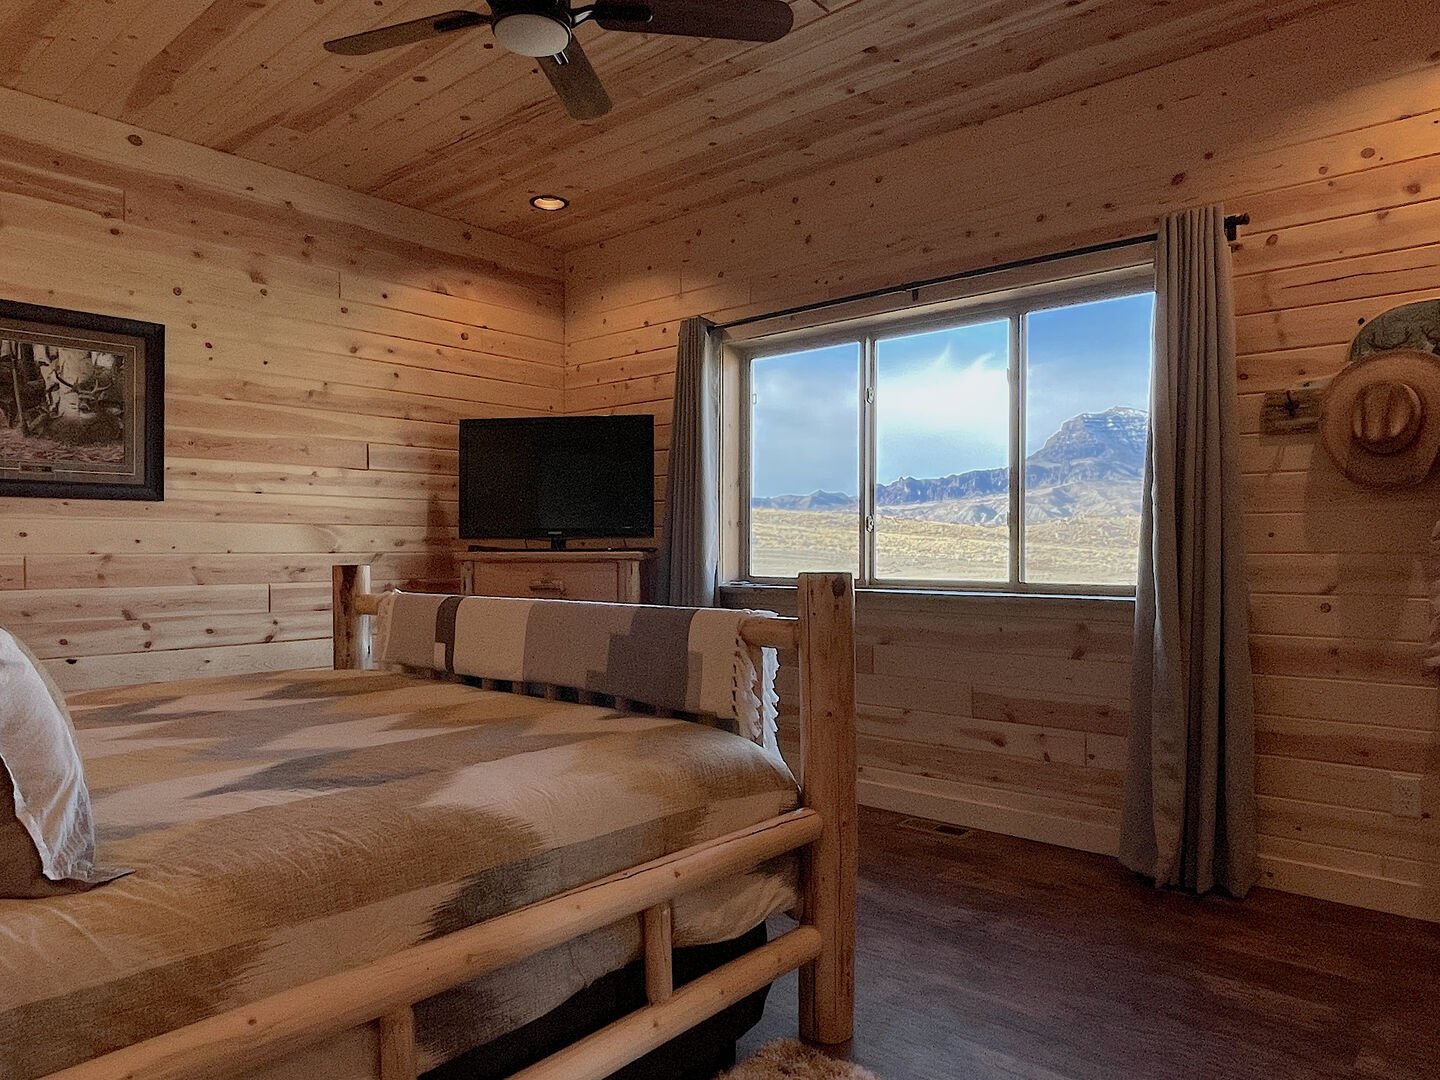 Master Bedroom with great views!